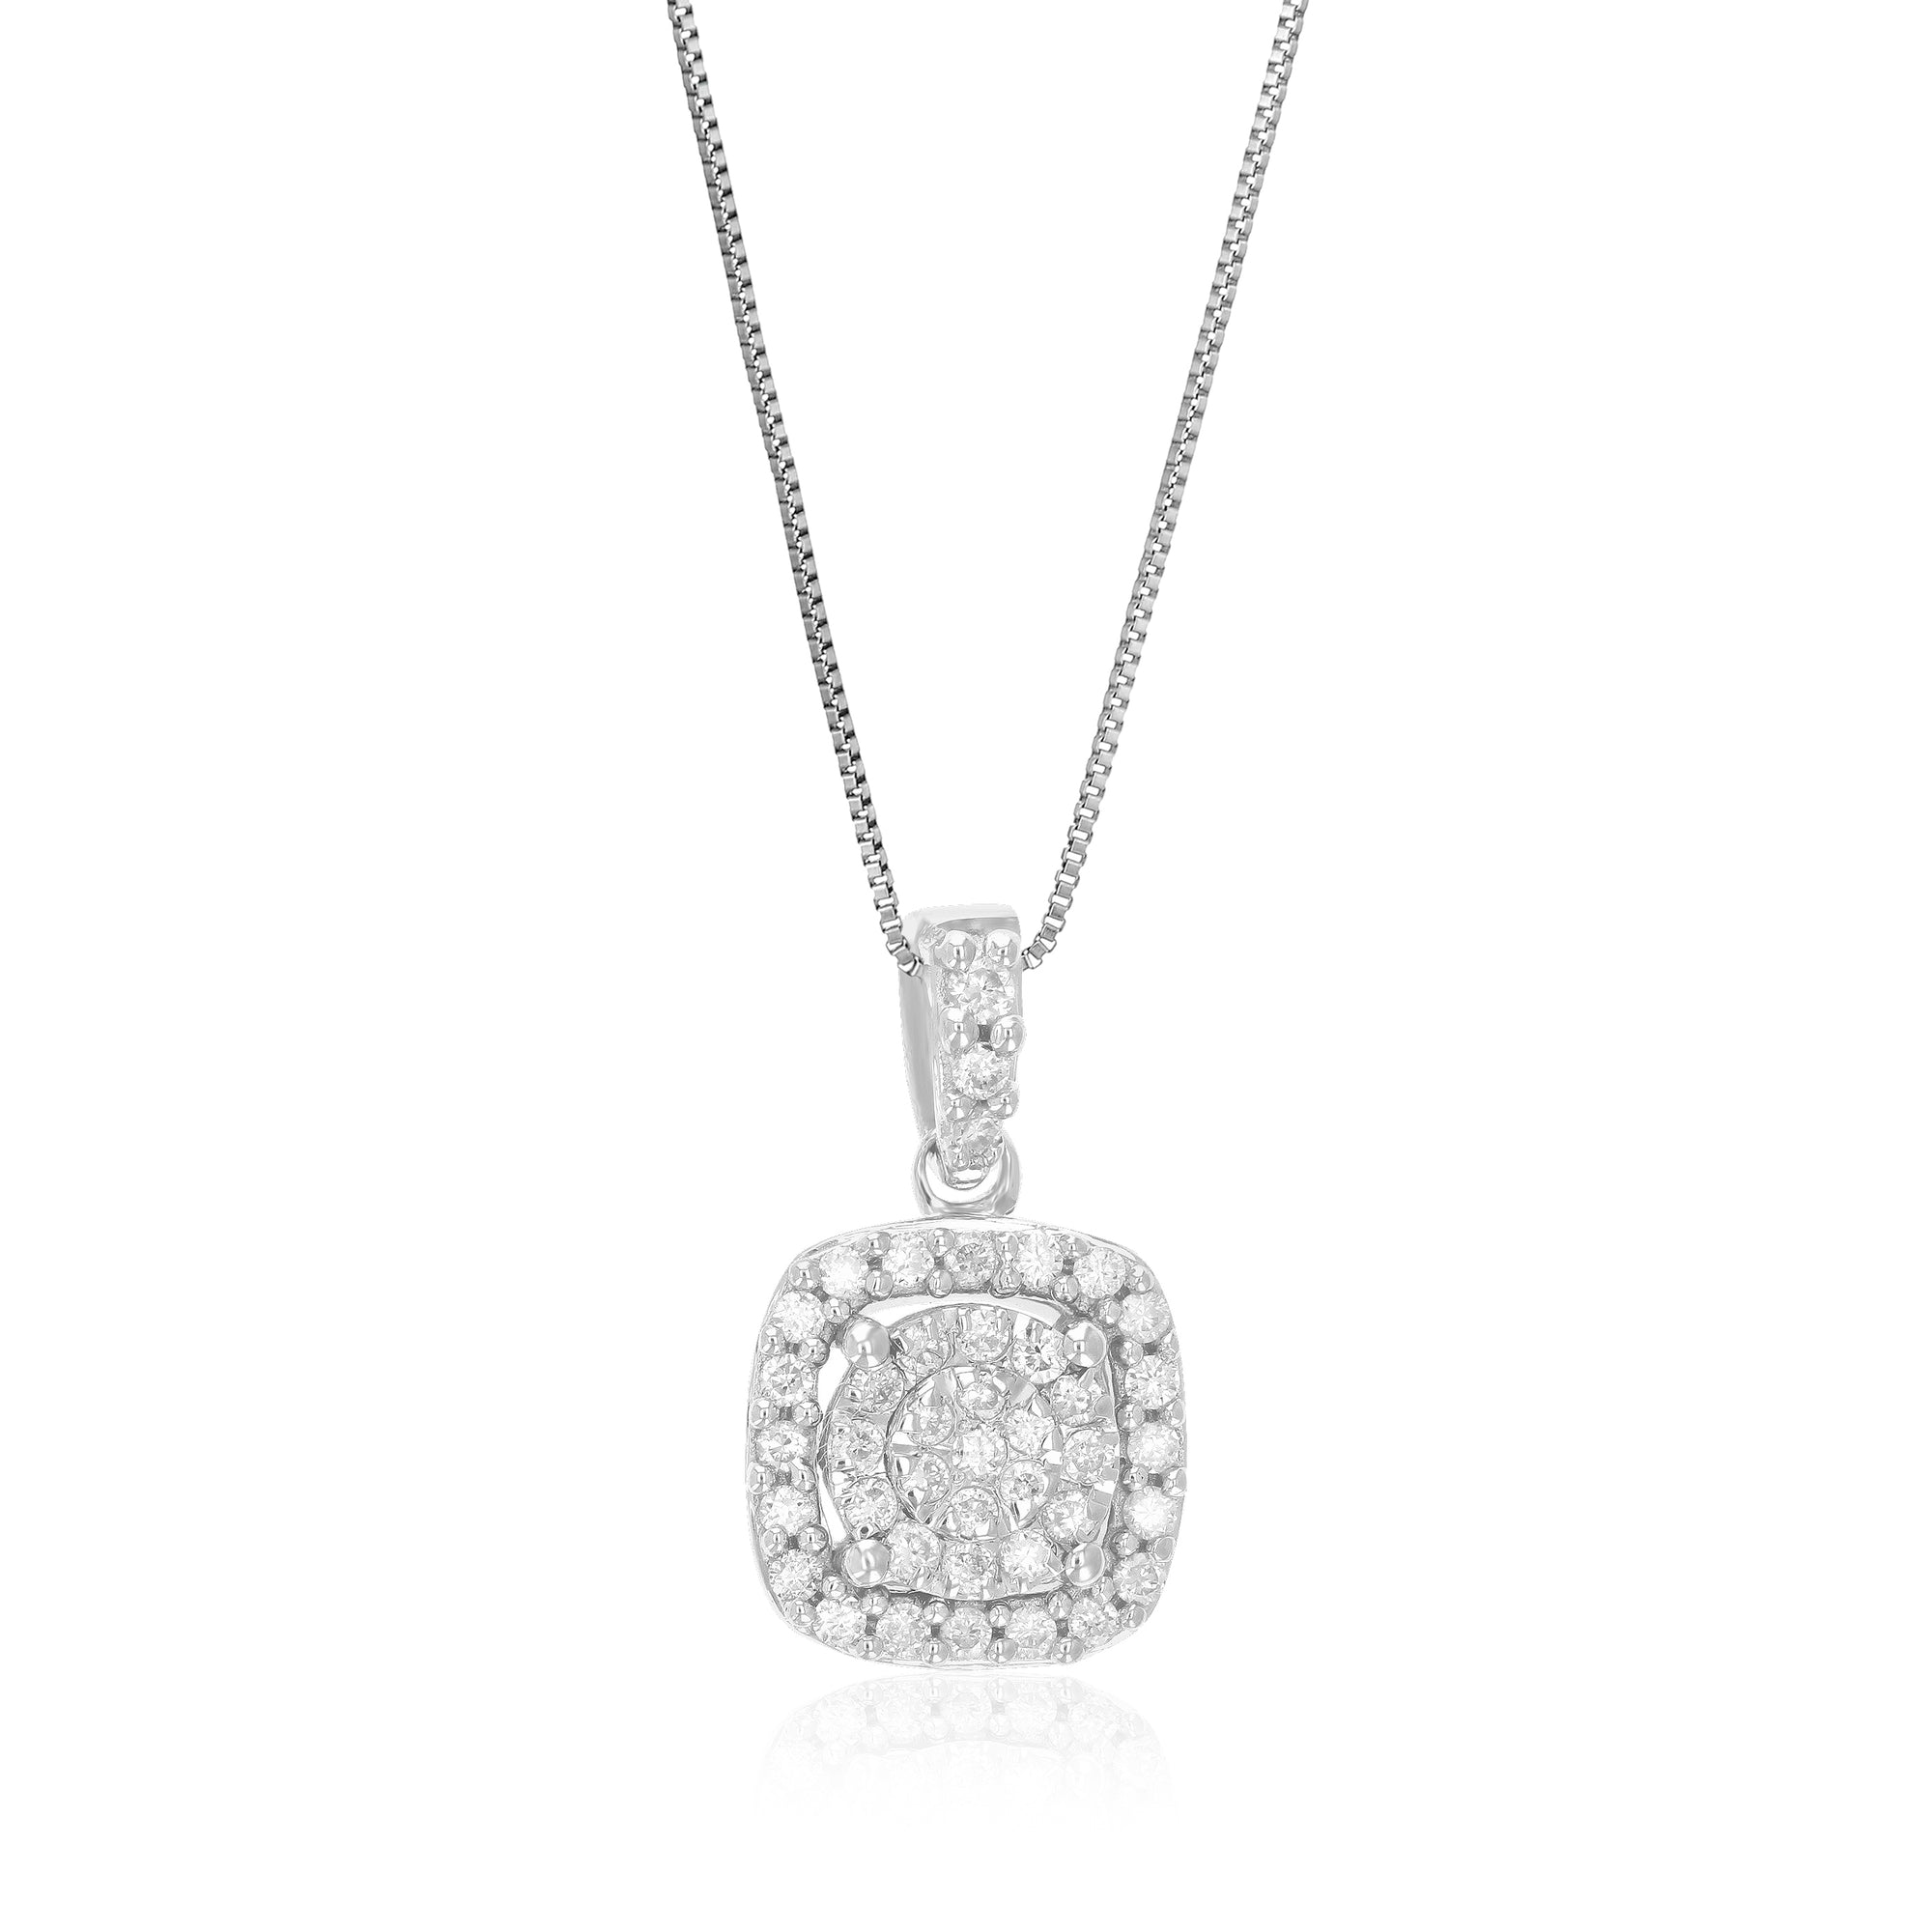 1/6 cttw Diamond Pendant Necklace for Women, Lab Grown Diamond Square Pendant Necklace in .925 Sterling Silver with Chain, Size 1/2 Inch